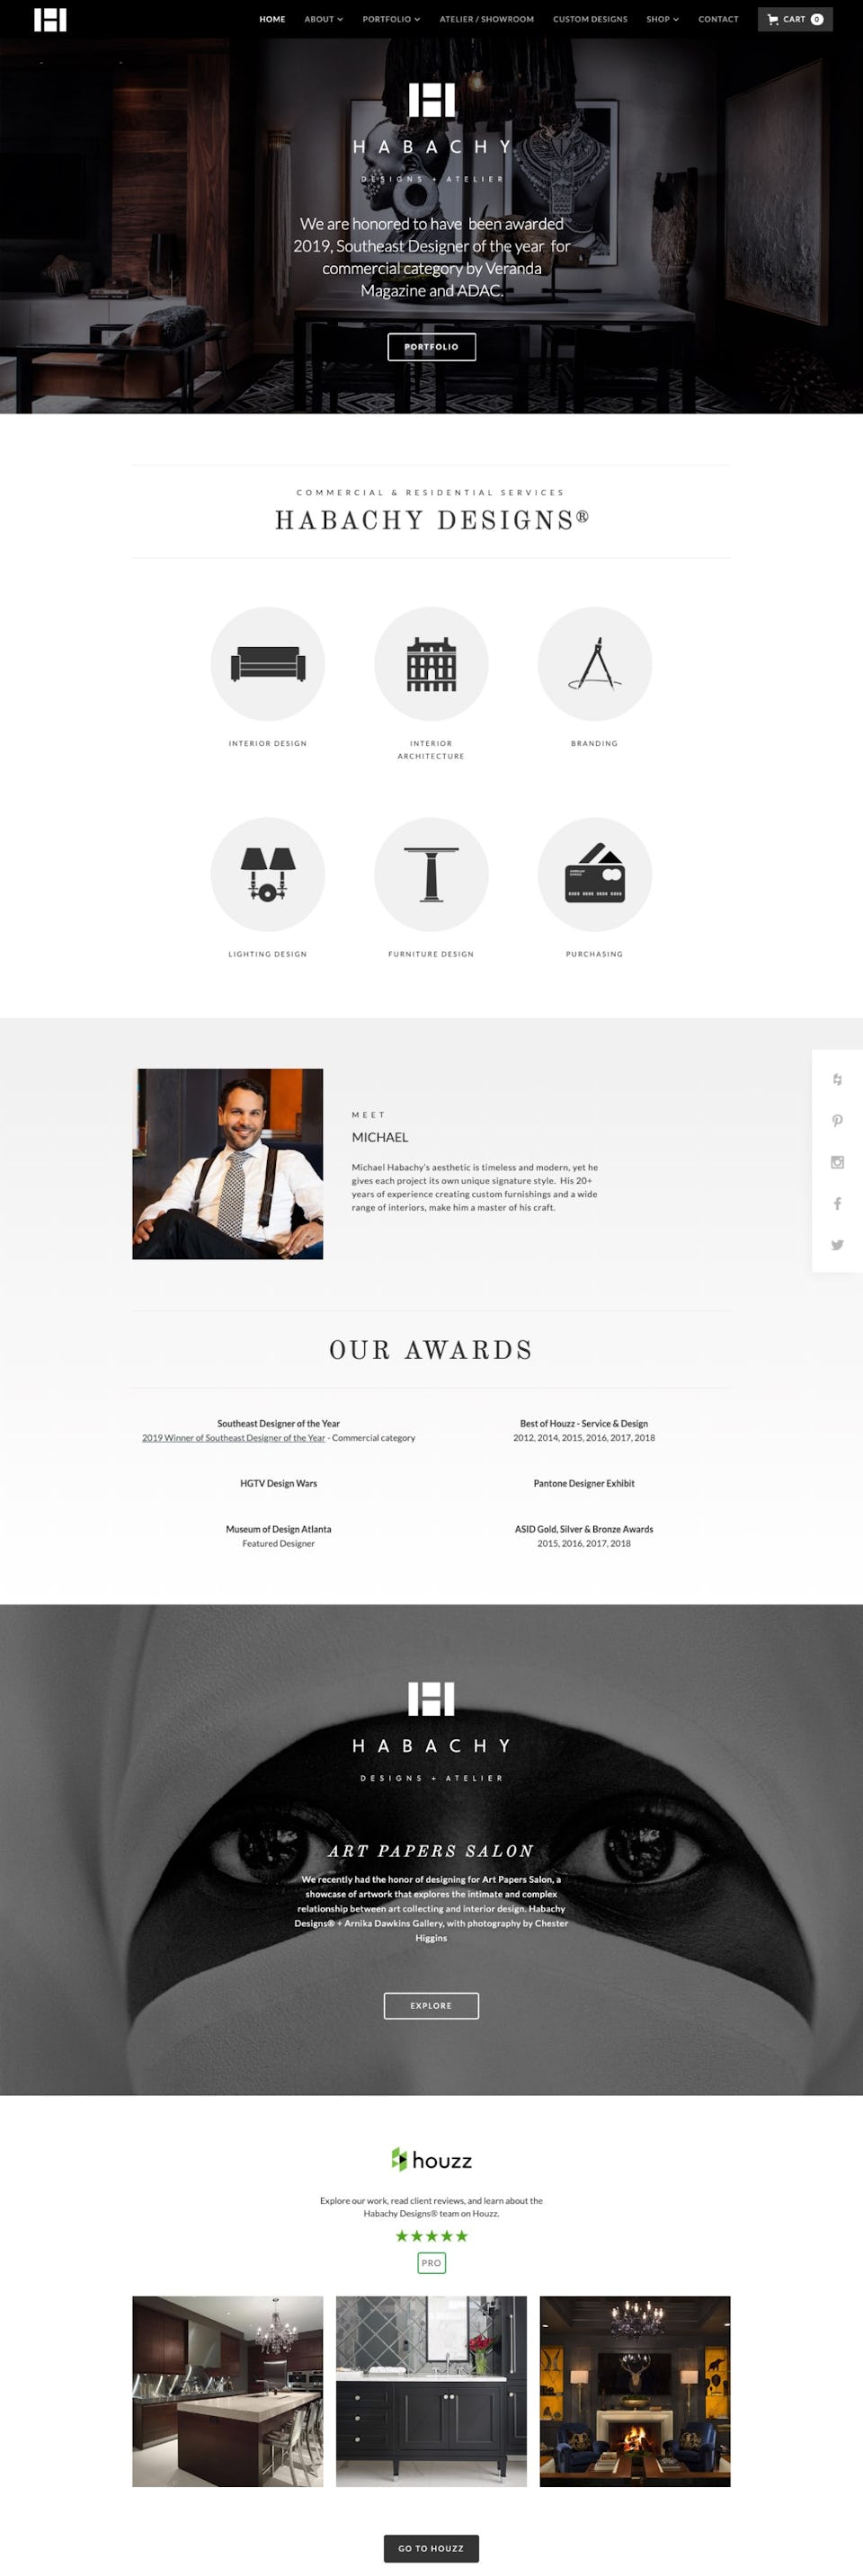 webflow project 3 - Habachy Designs